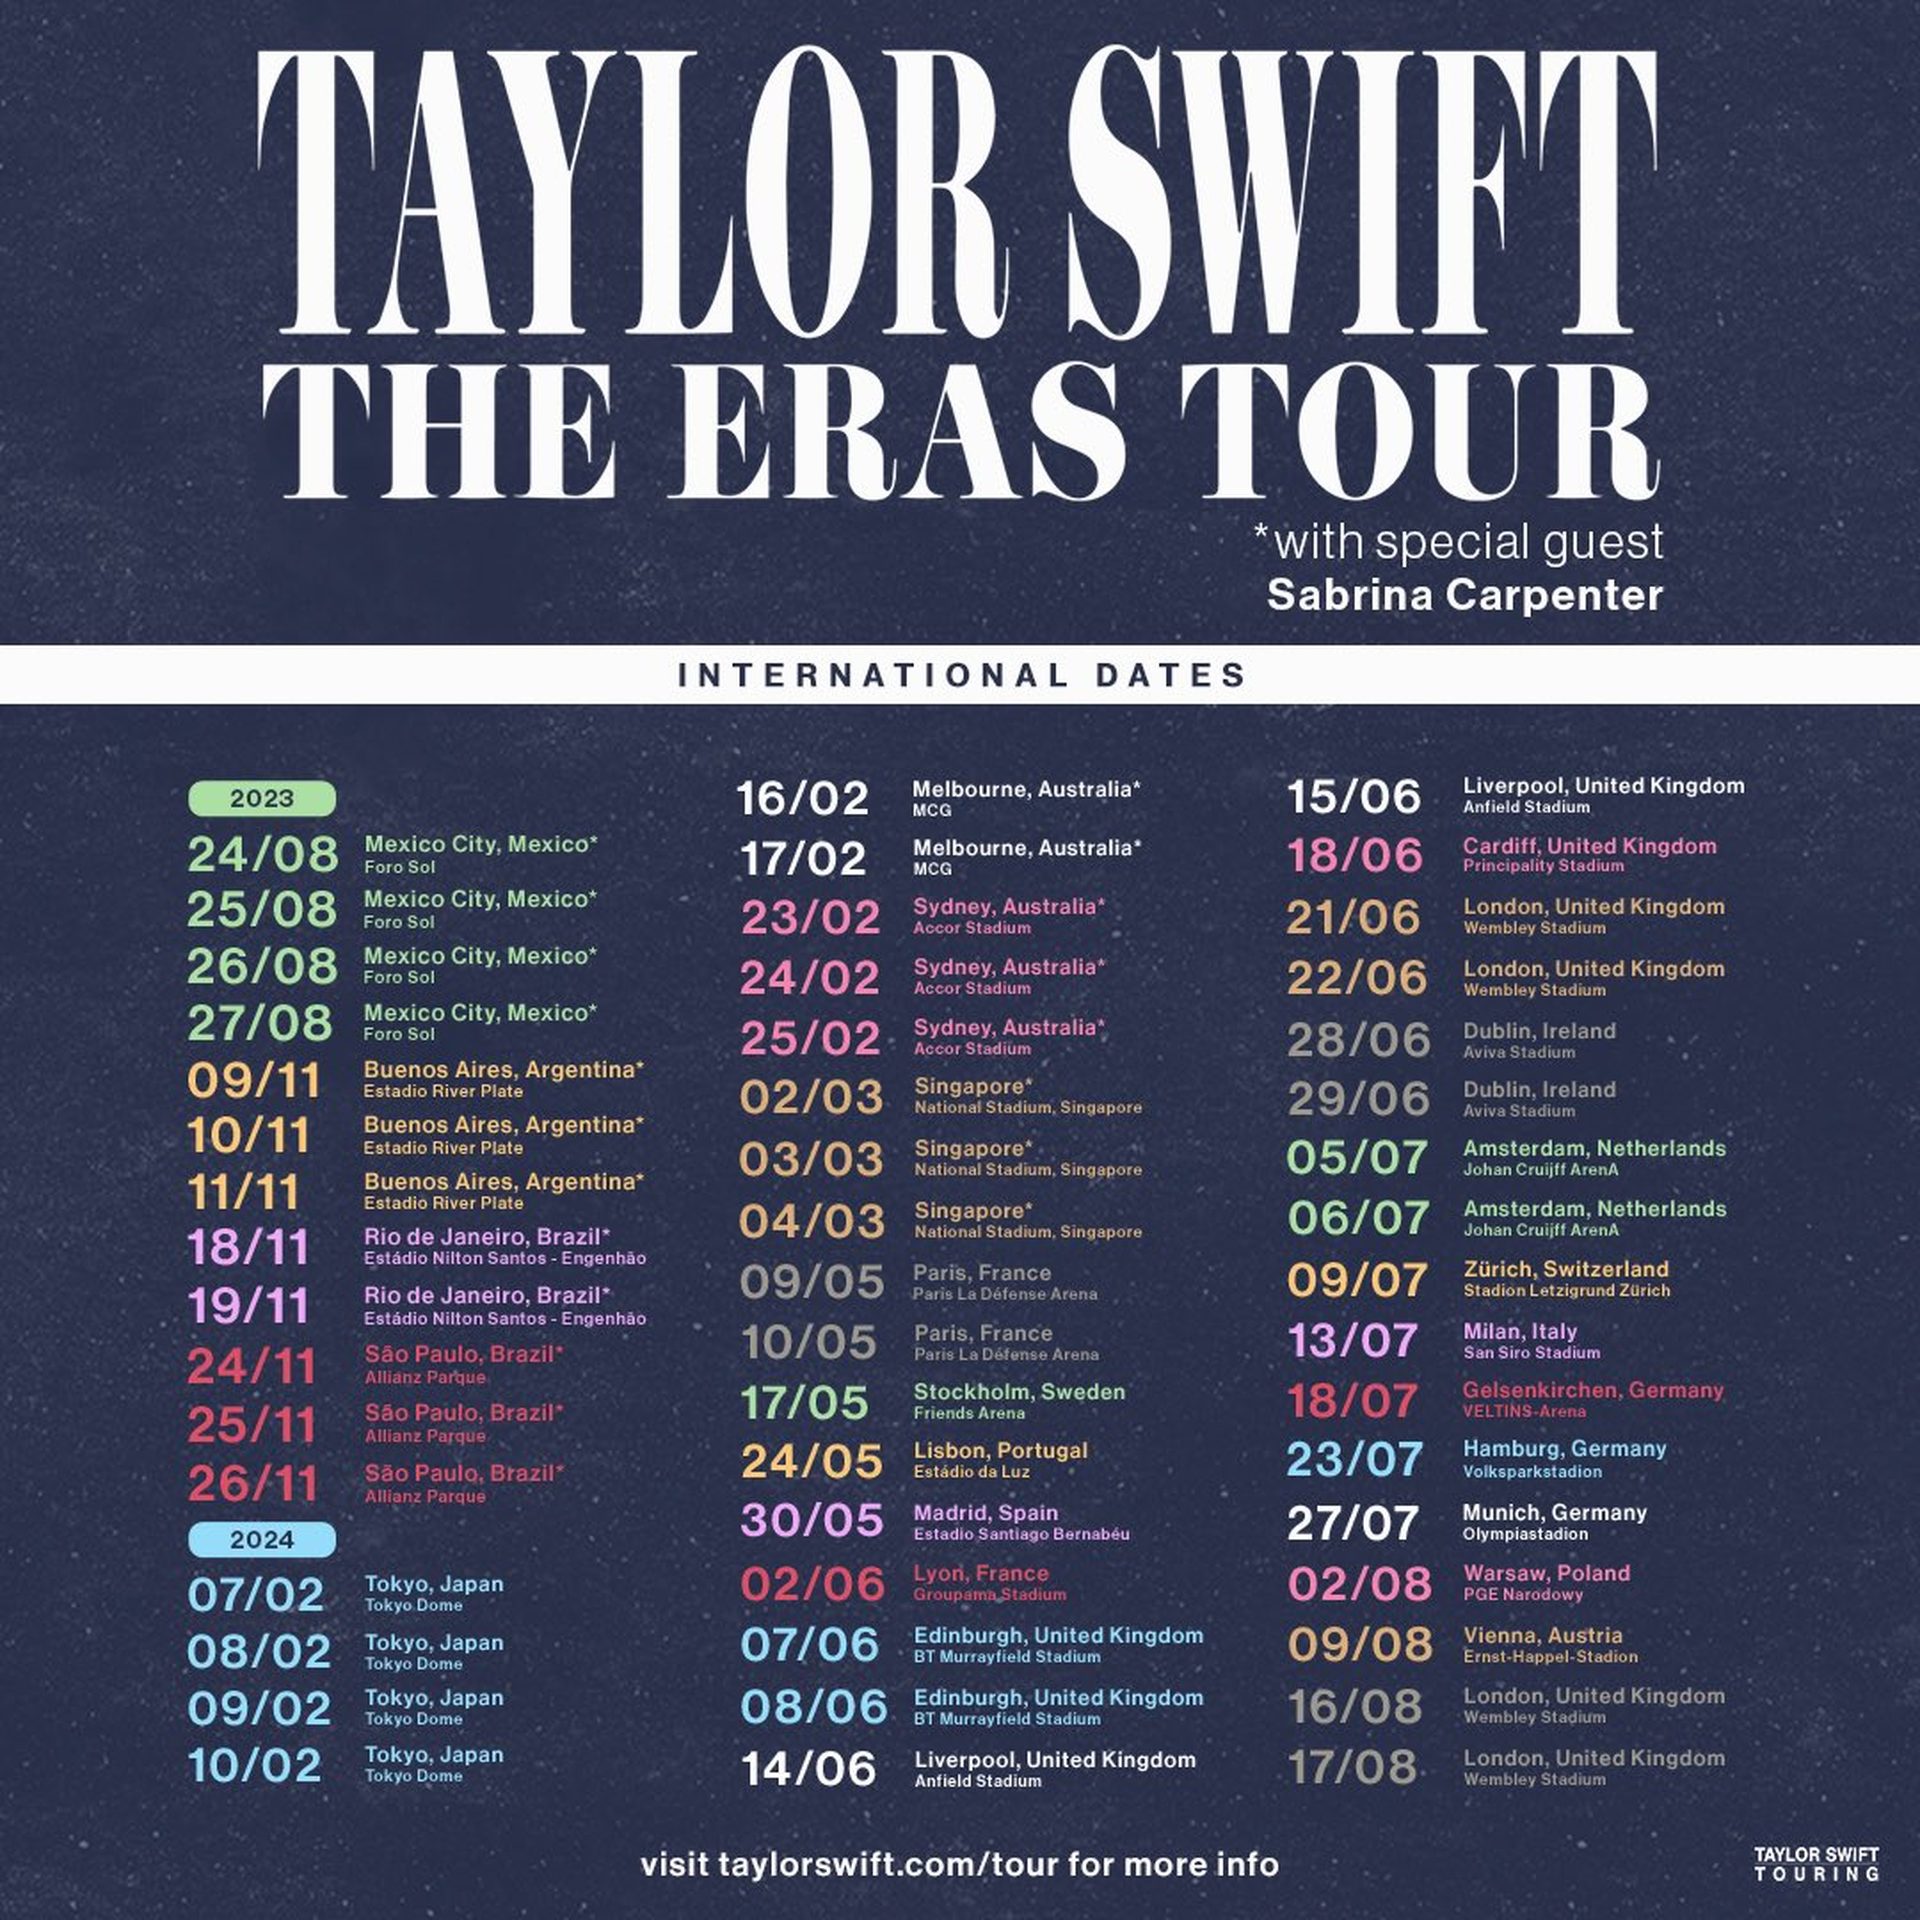 How to get Taylor Swift tickets for Eras tour (UK and Europe)? Learn Taylor Swift international tour dates and find out why getting a ticket is so hard